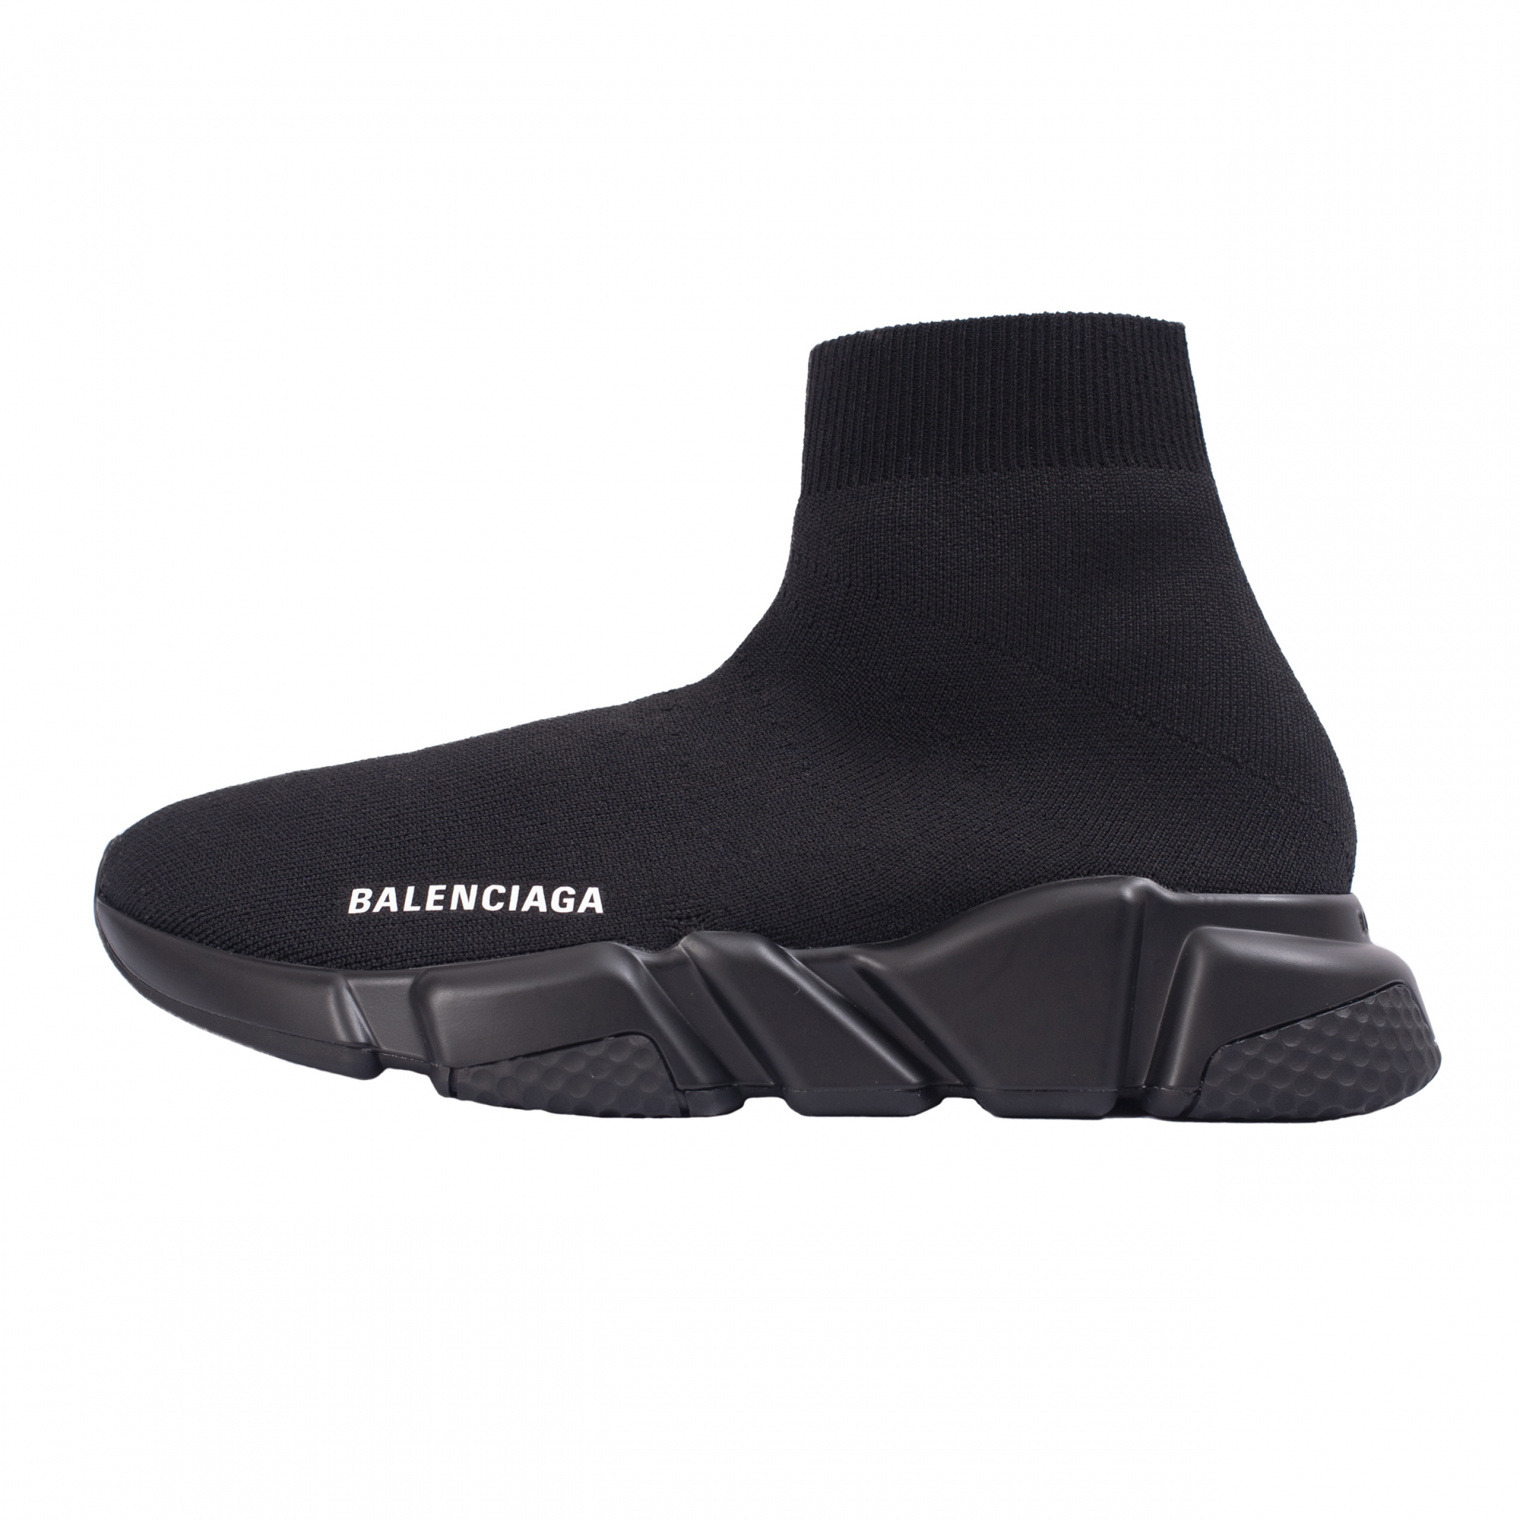 The 18 Best Balenciaga Sneakers of All Time Ranked